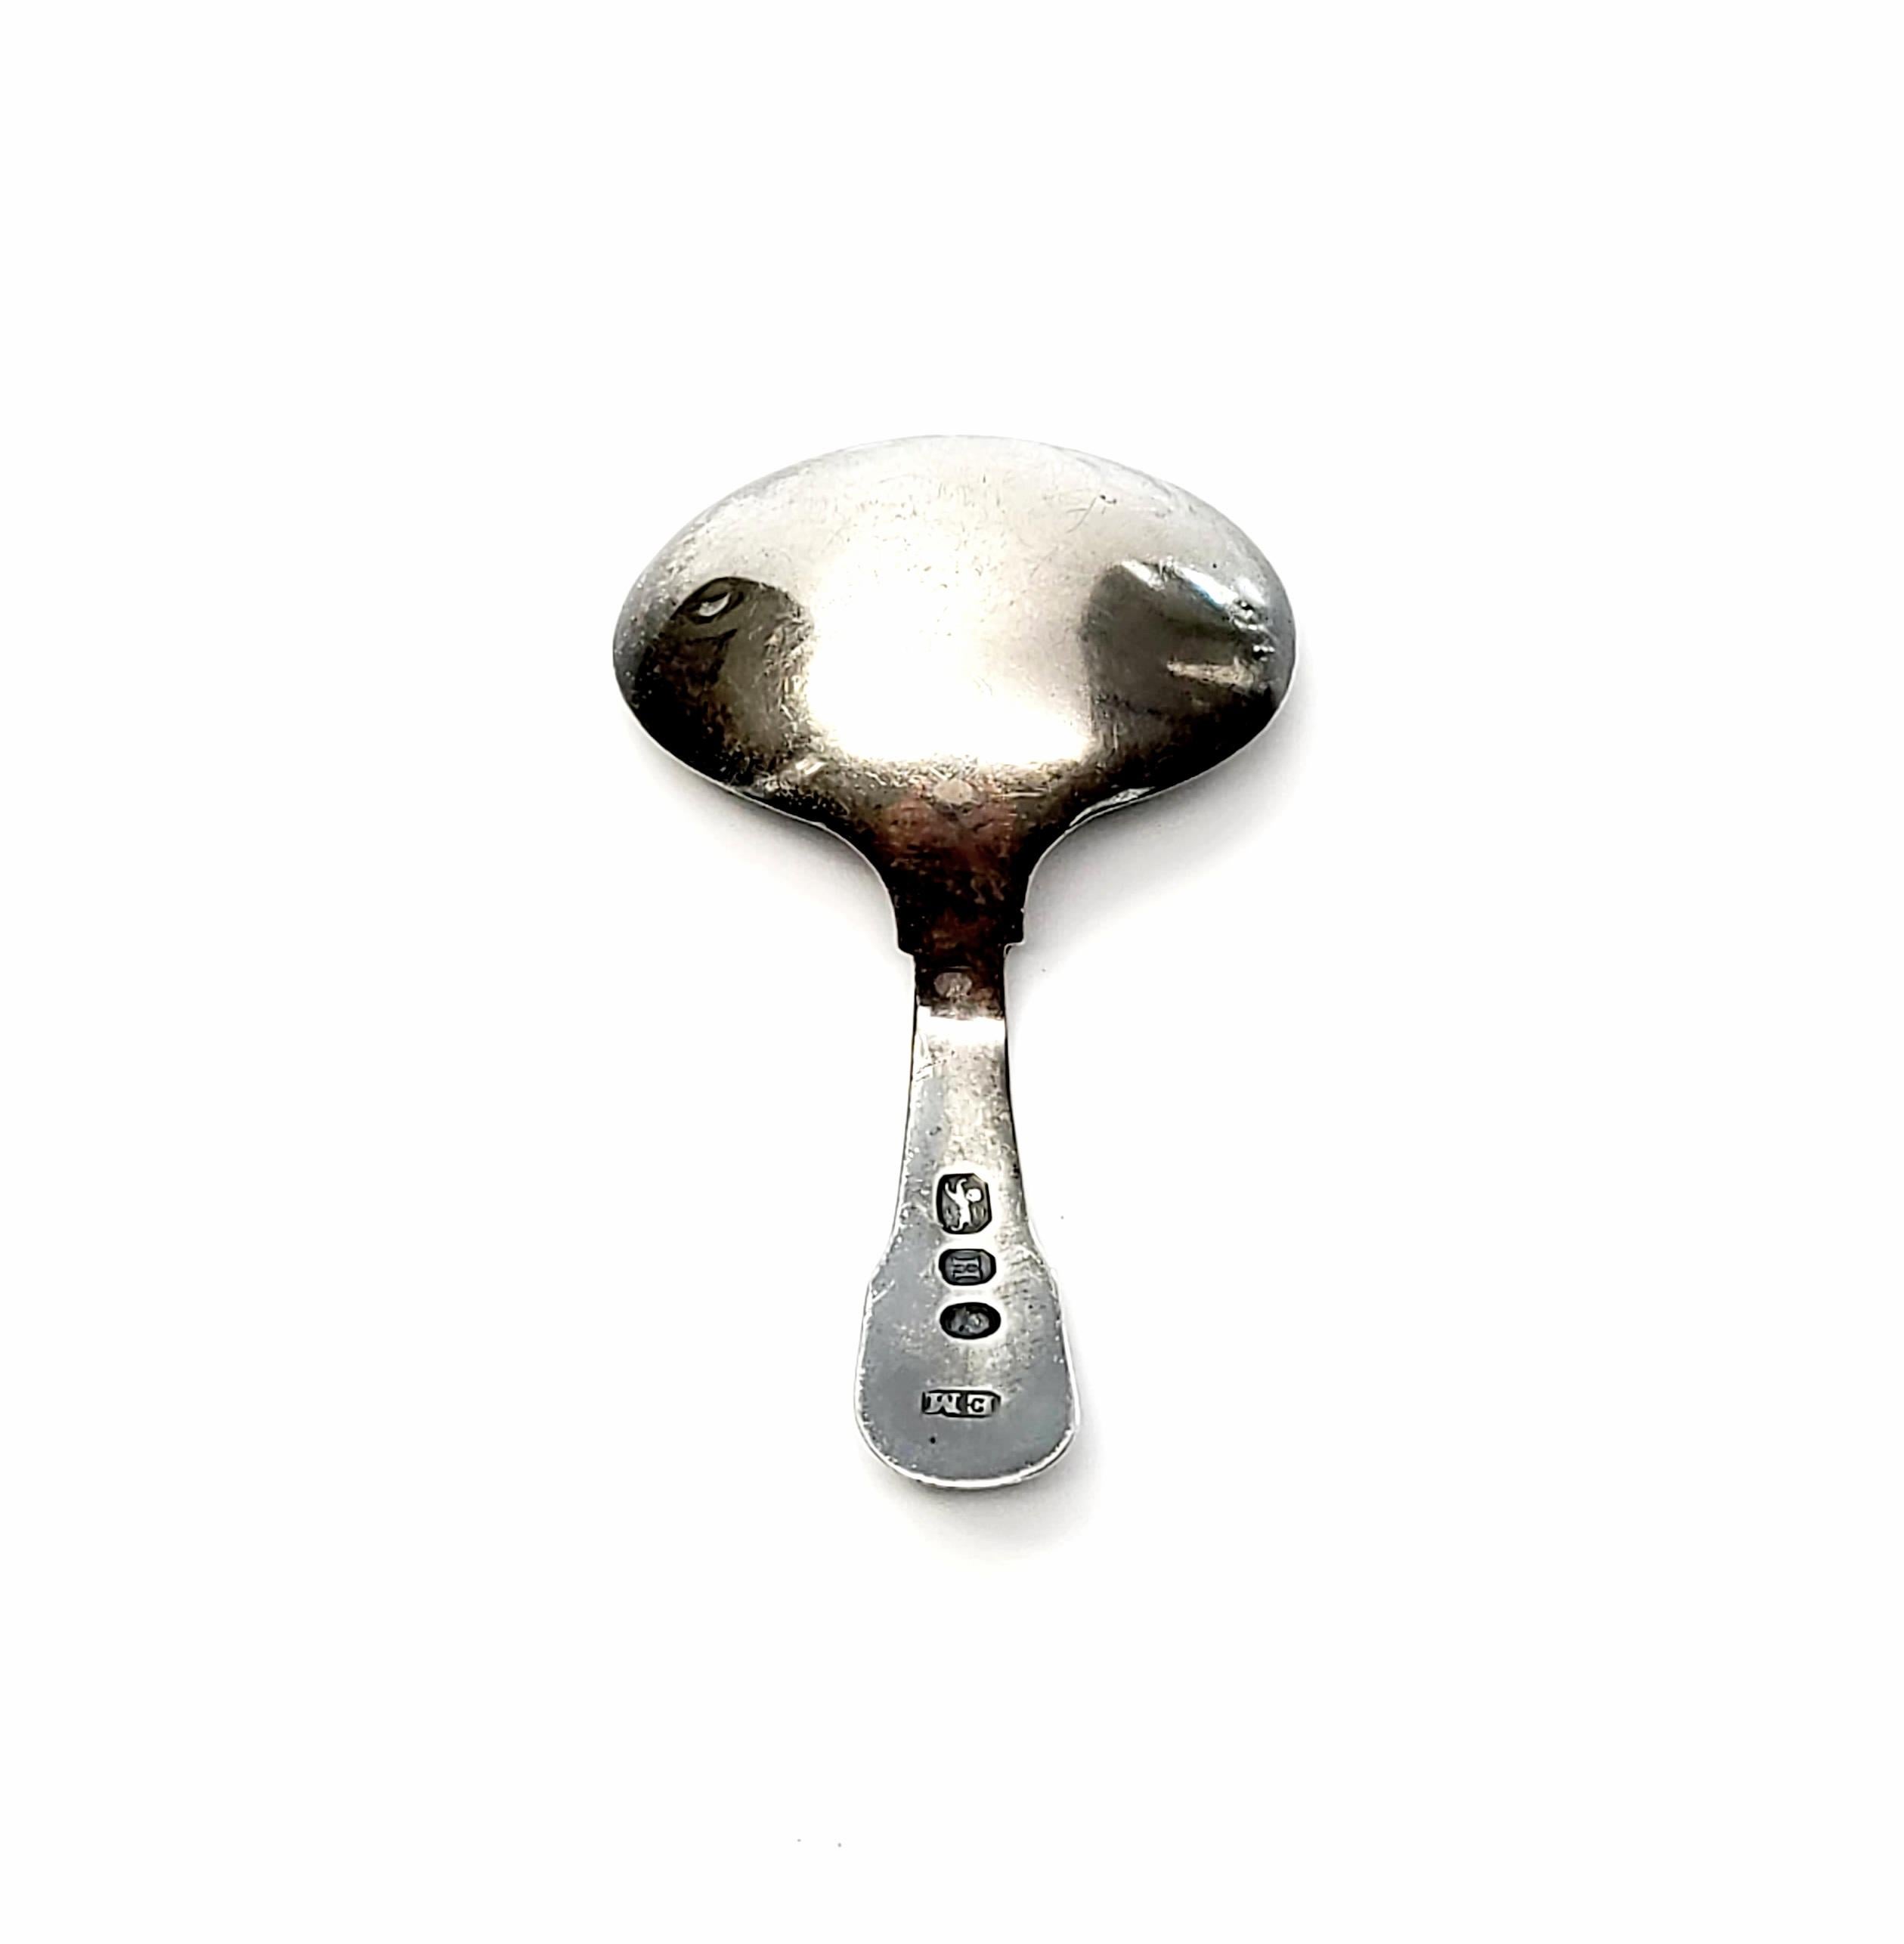 Sterling silver caddy spoons by Elizabeth Morley of London, c.1803.

Monogram appears to be WAS.

Small wide bowl caddy spoon with a simple and timeless design of the Georgian Era.

Measures 2 7/8